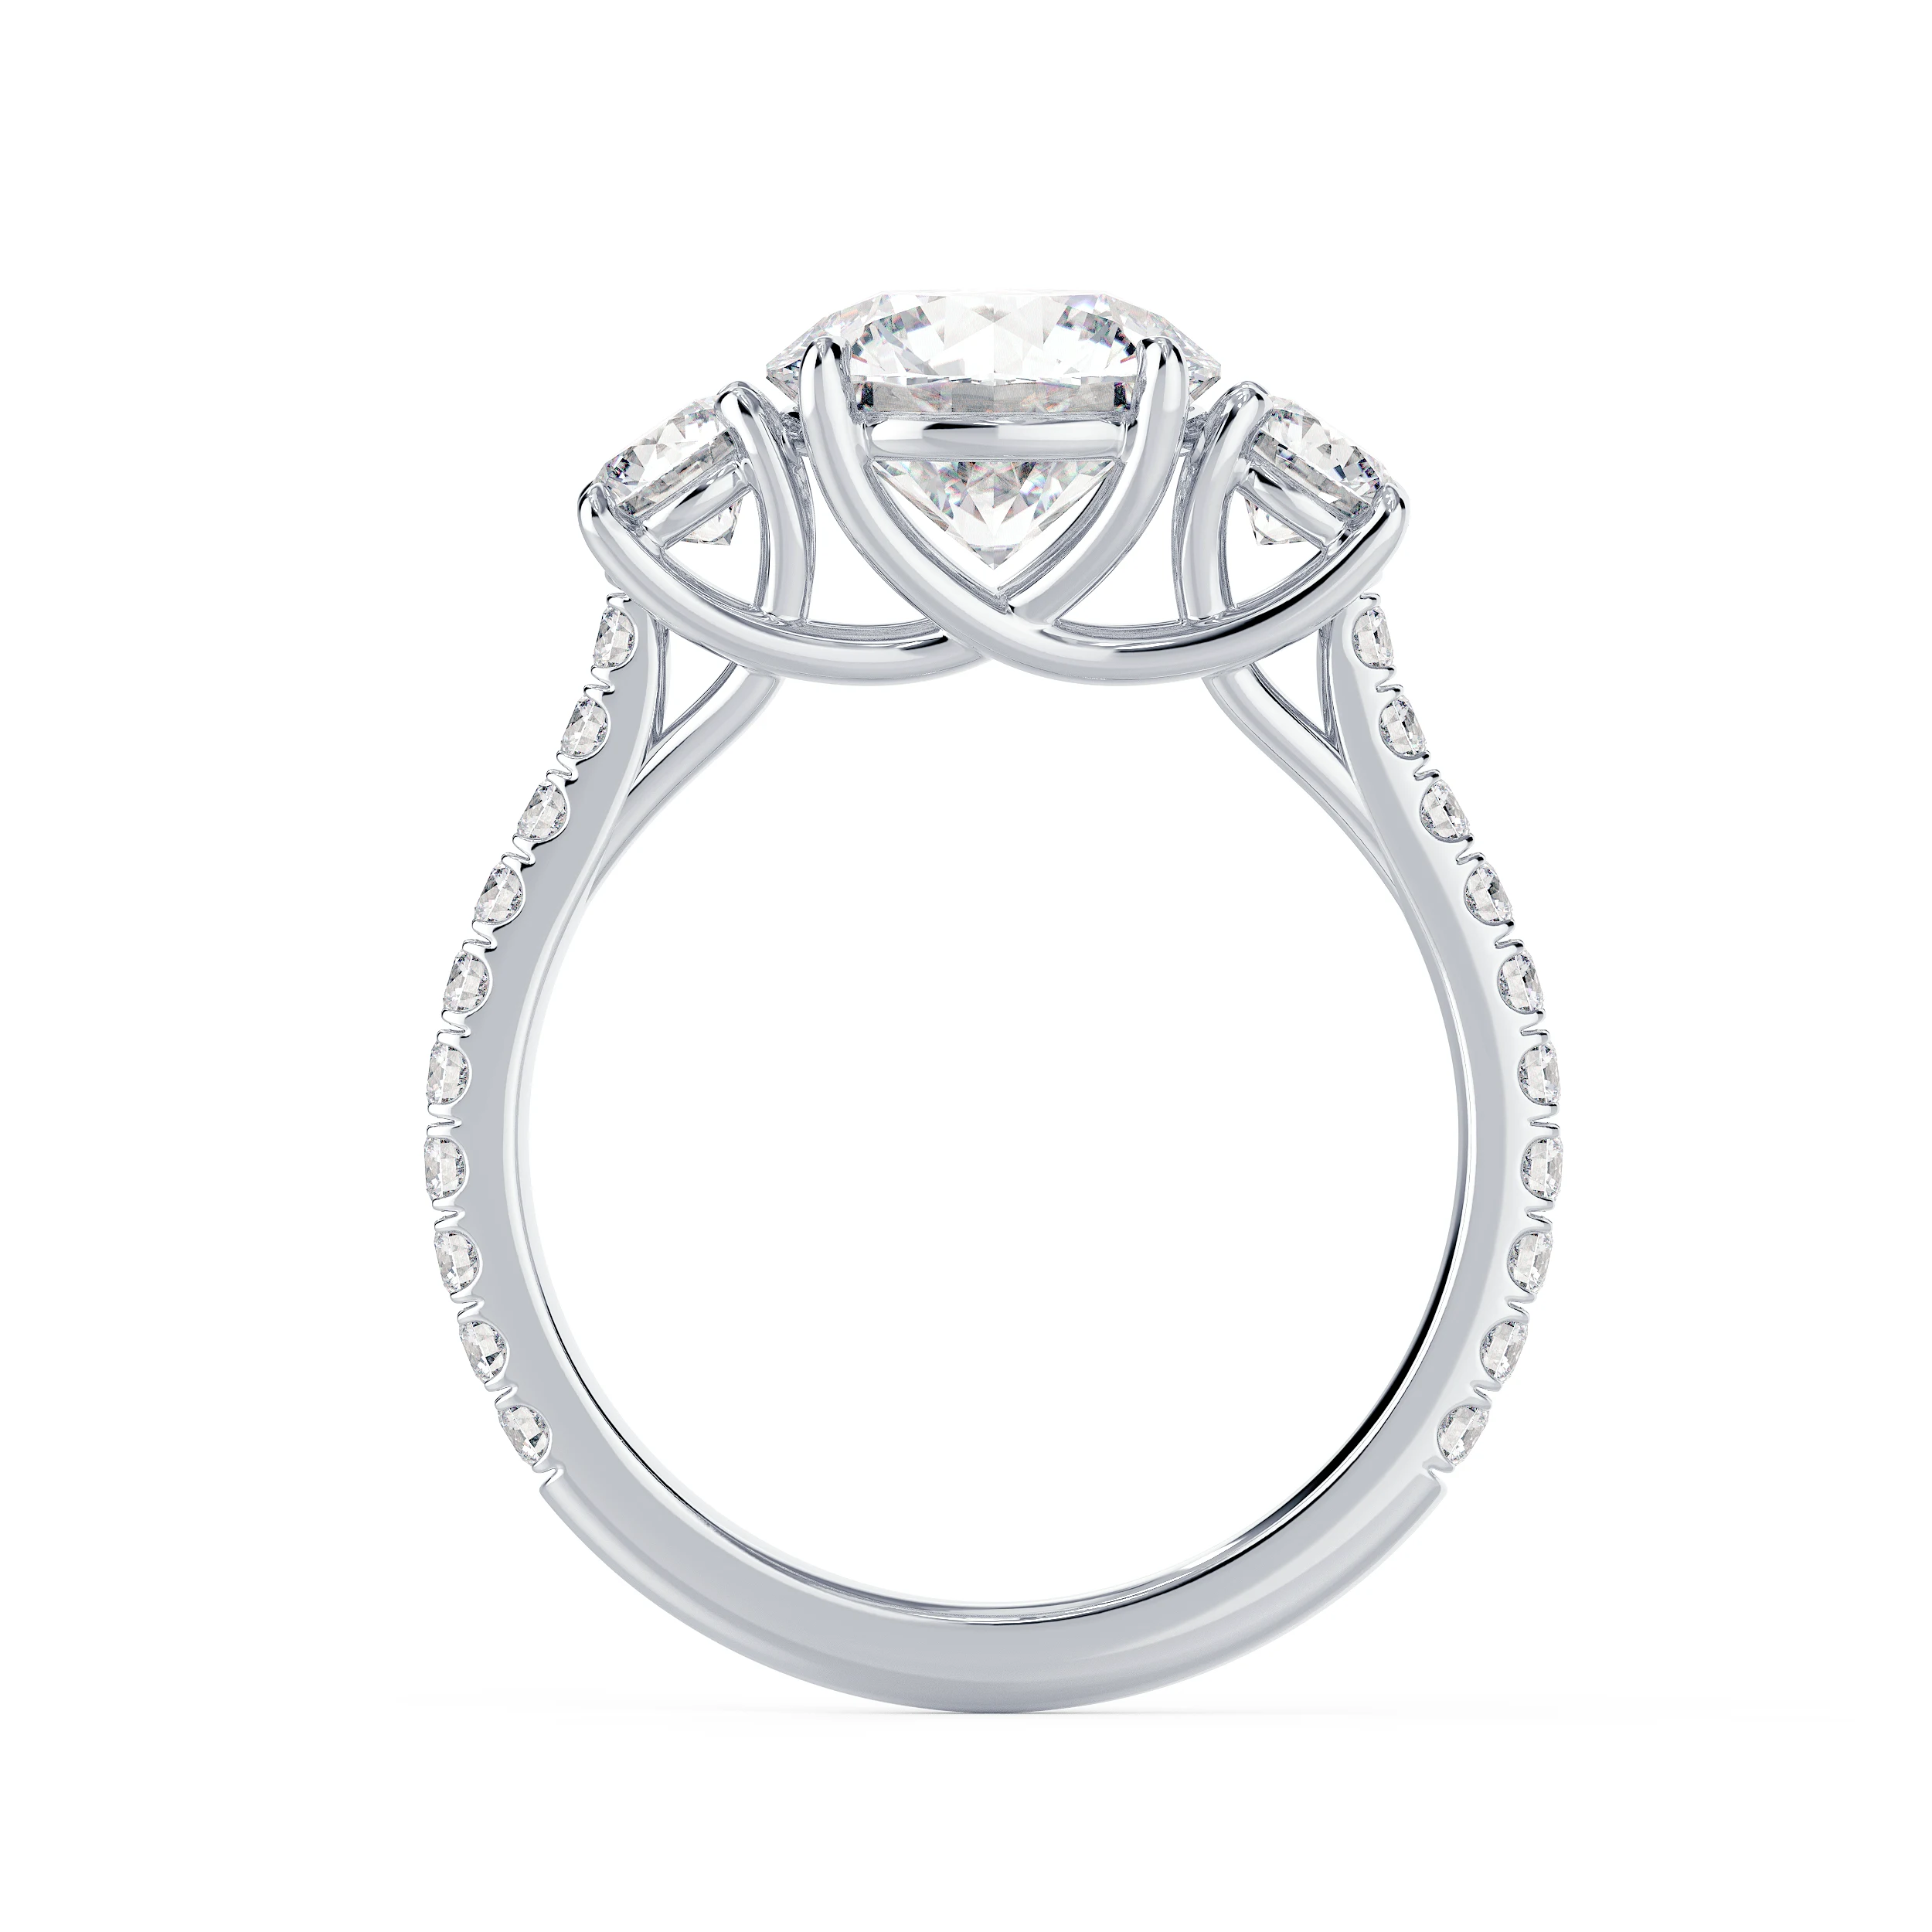 White Gold Round Three Stone Pavé Diamond Engagement Ring featuring Hand Selected Diamonds (Profile View)